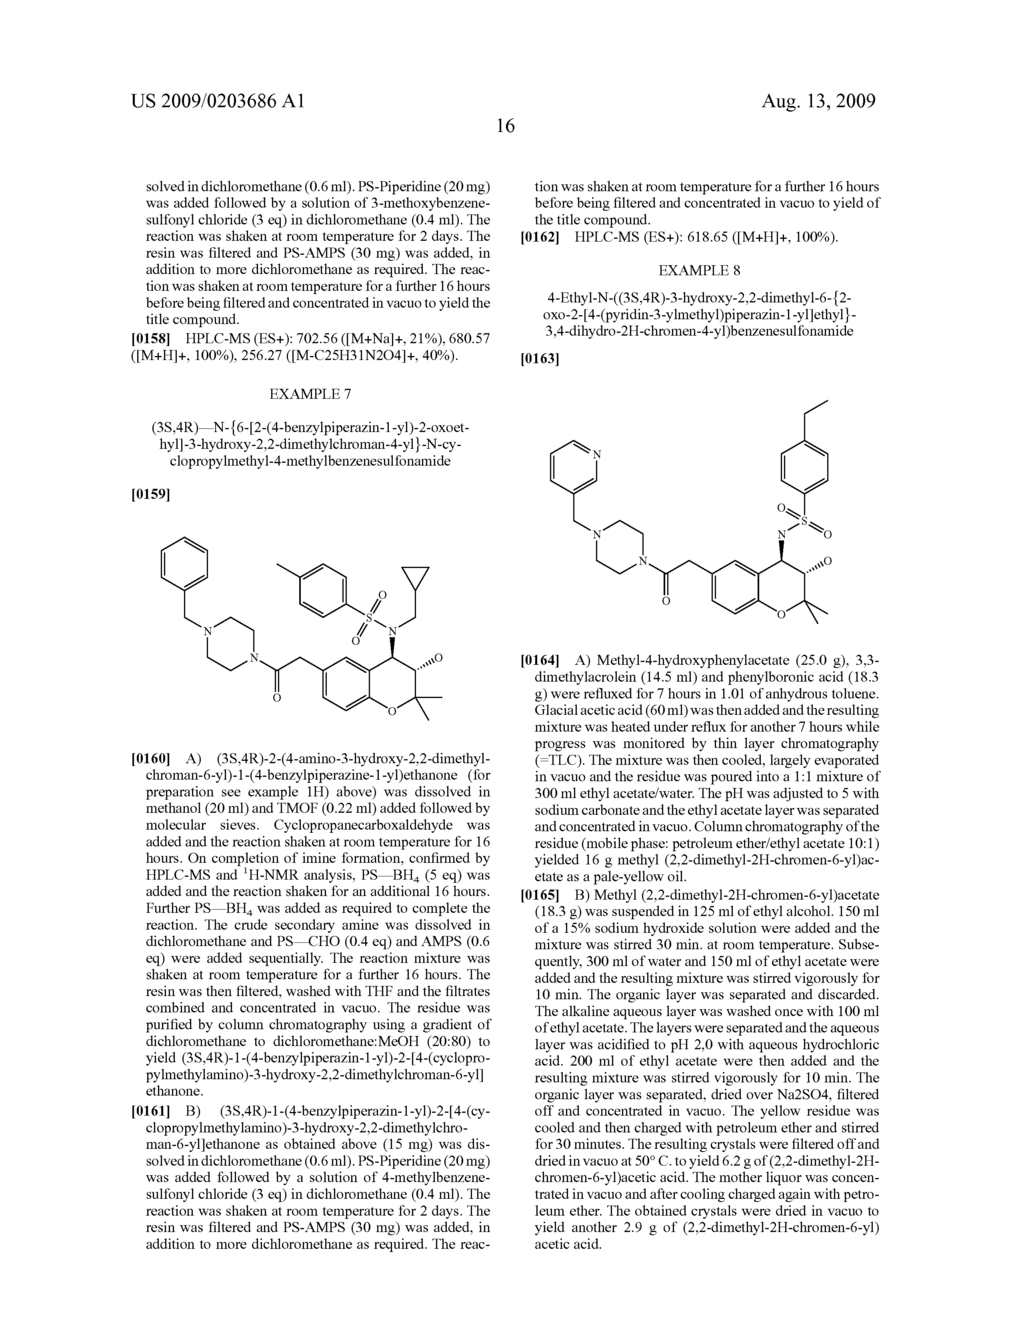 Aminoalkyl-Amidomethyl-Substituted 2-(4-Sulphonylamino)- 3-Hydroxy-3,4-Dihydro-2H-Chroman-6-yl Derivatives - diagram, schematic, and image 17